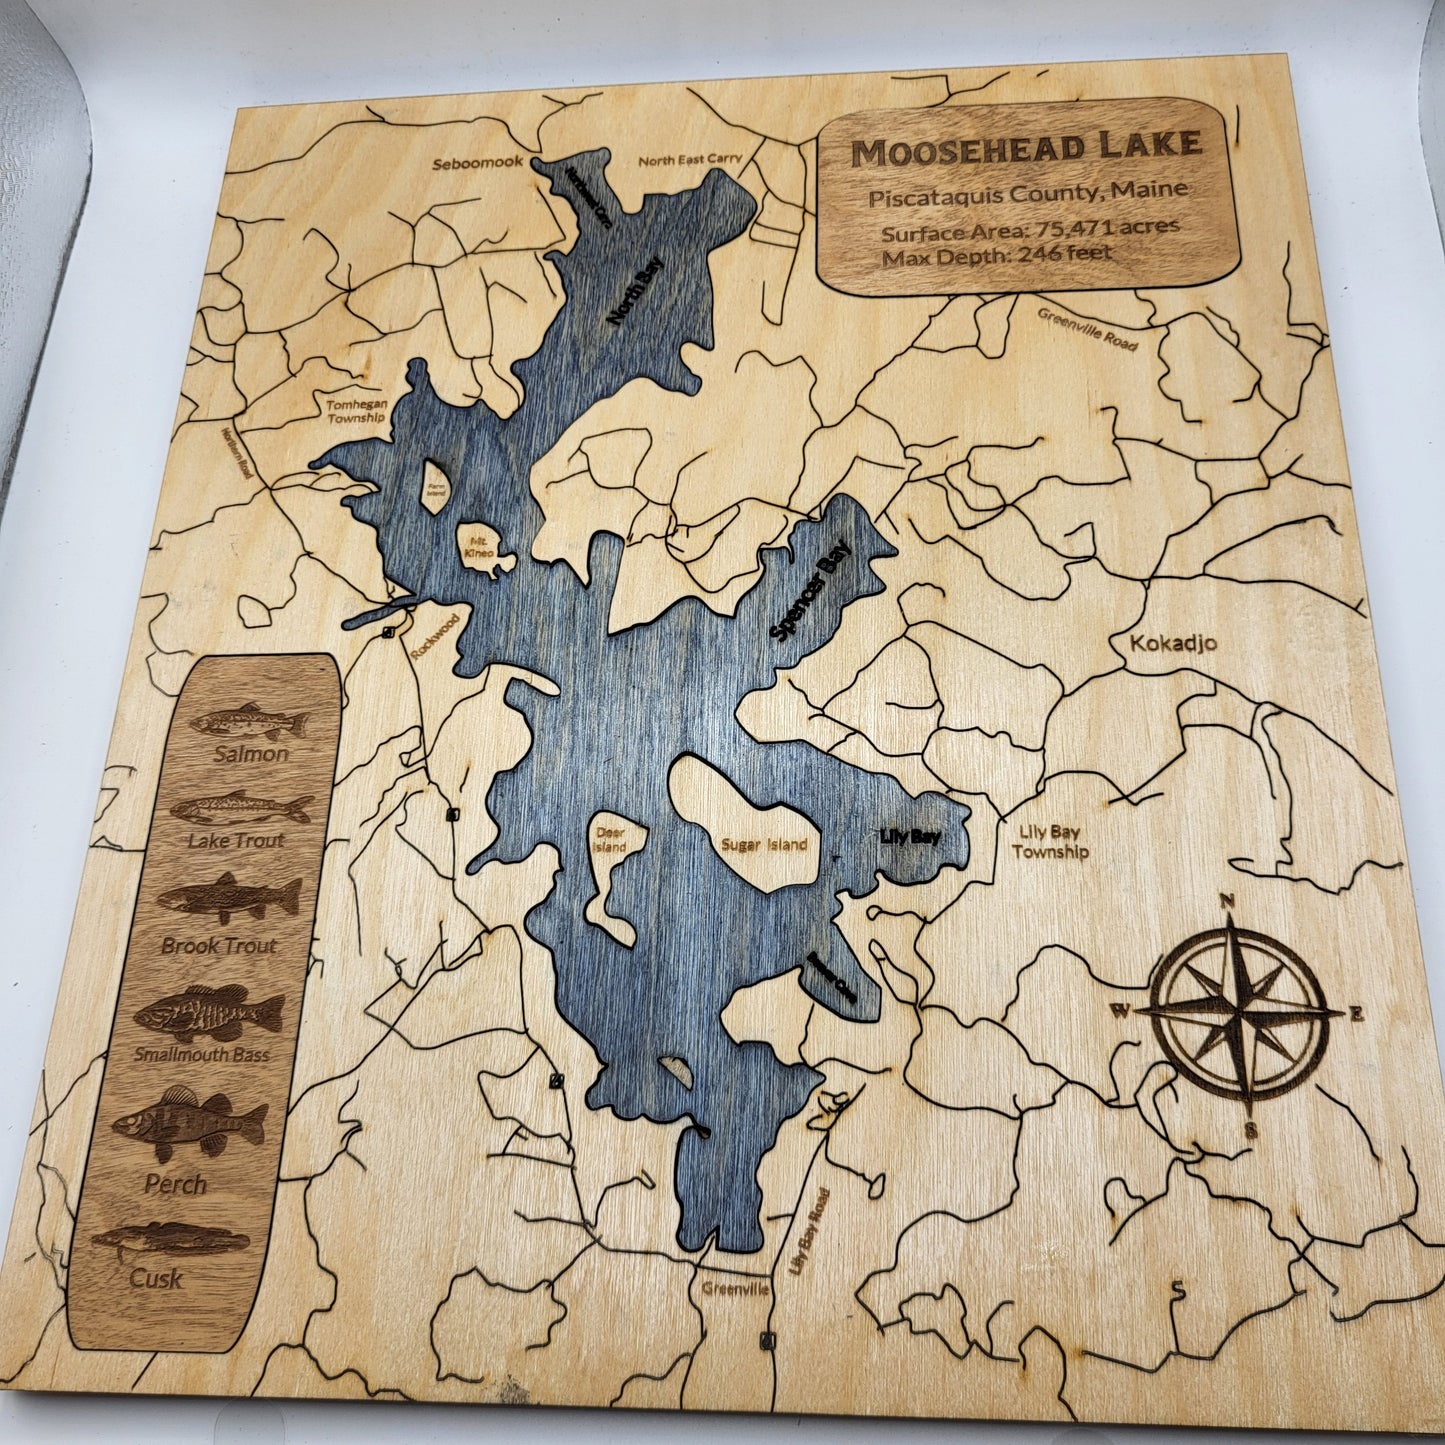 Deluxe Lake Map